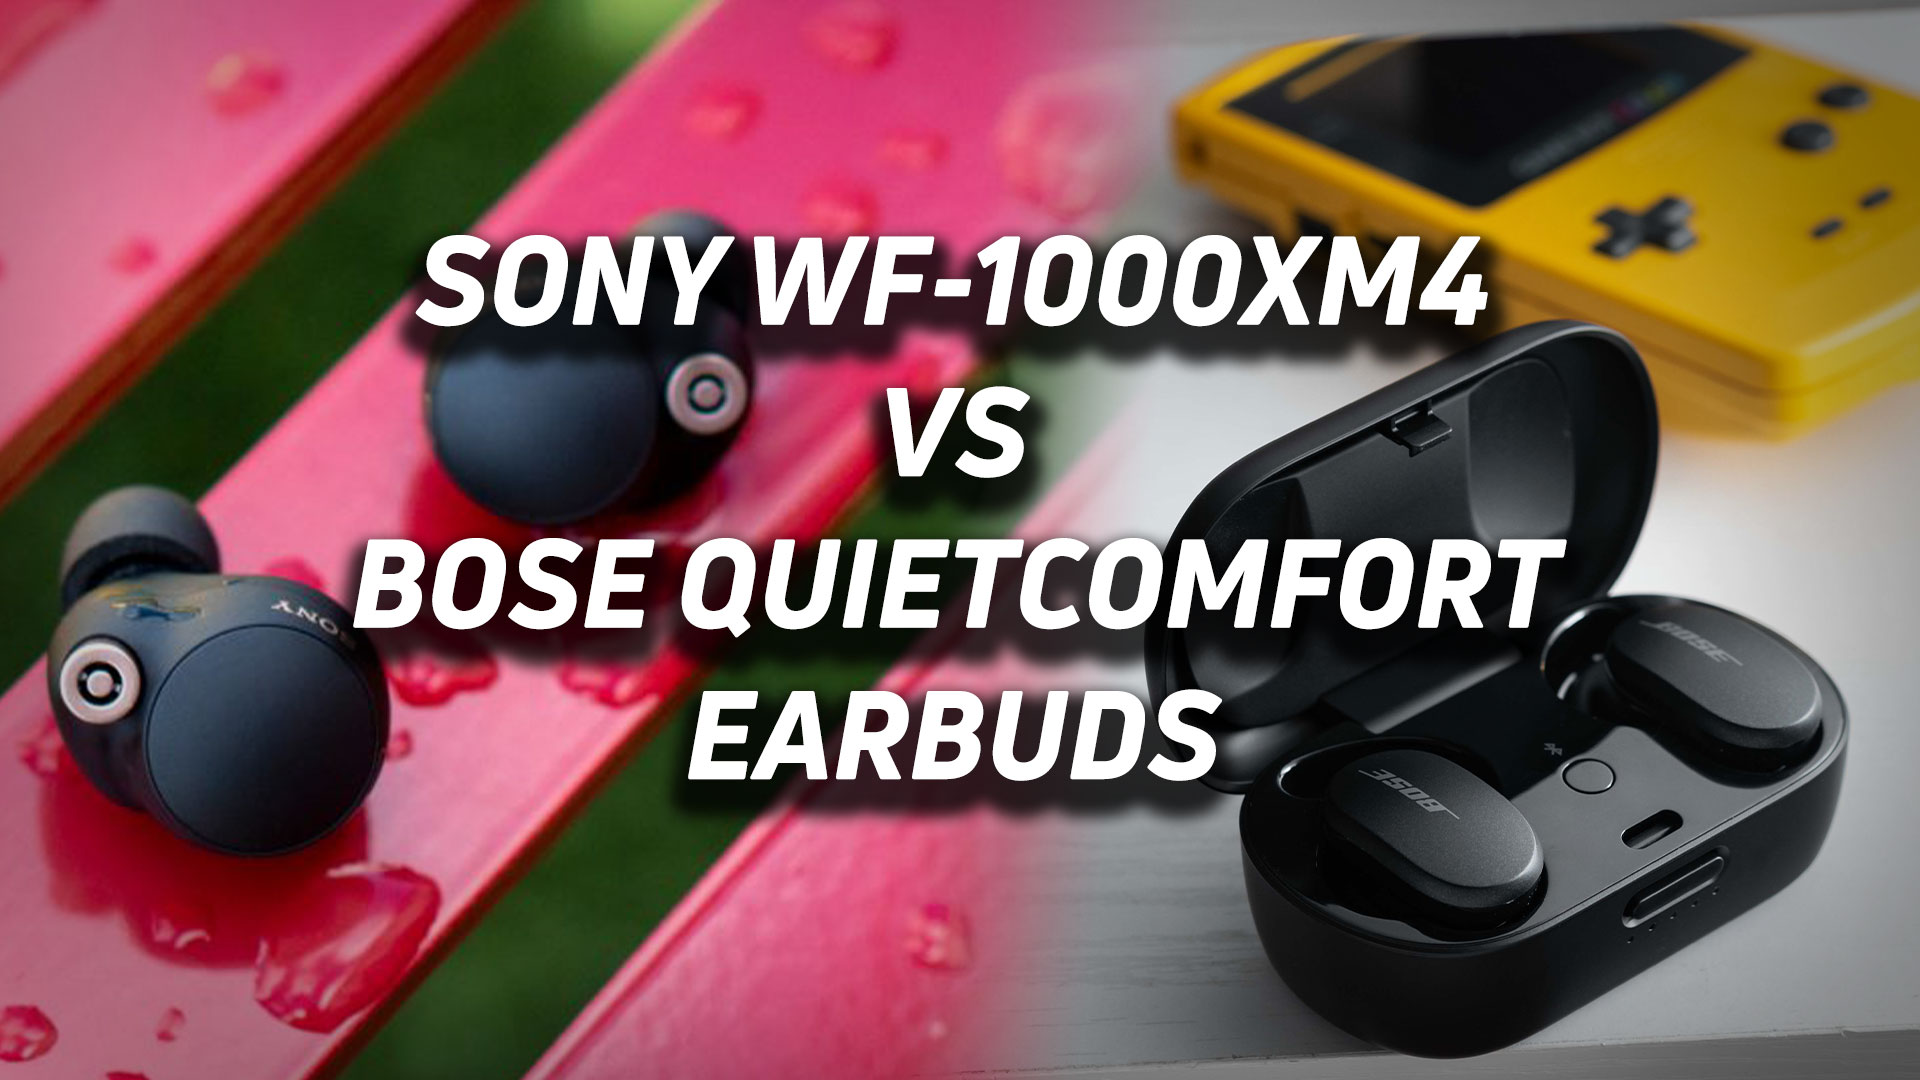 Sony WF-1000XM4 gains new connectivity feature with latest update -   News